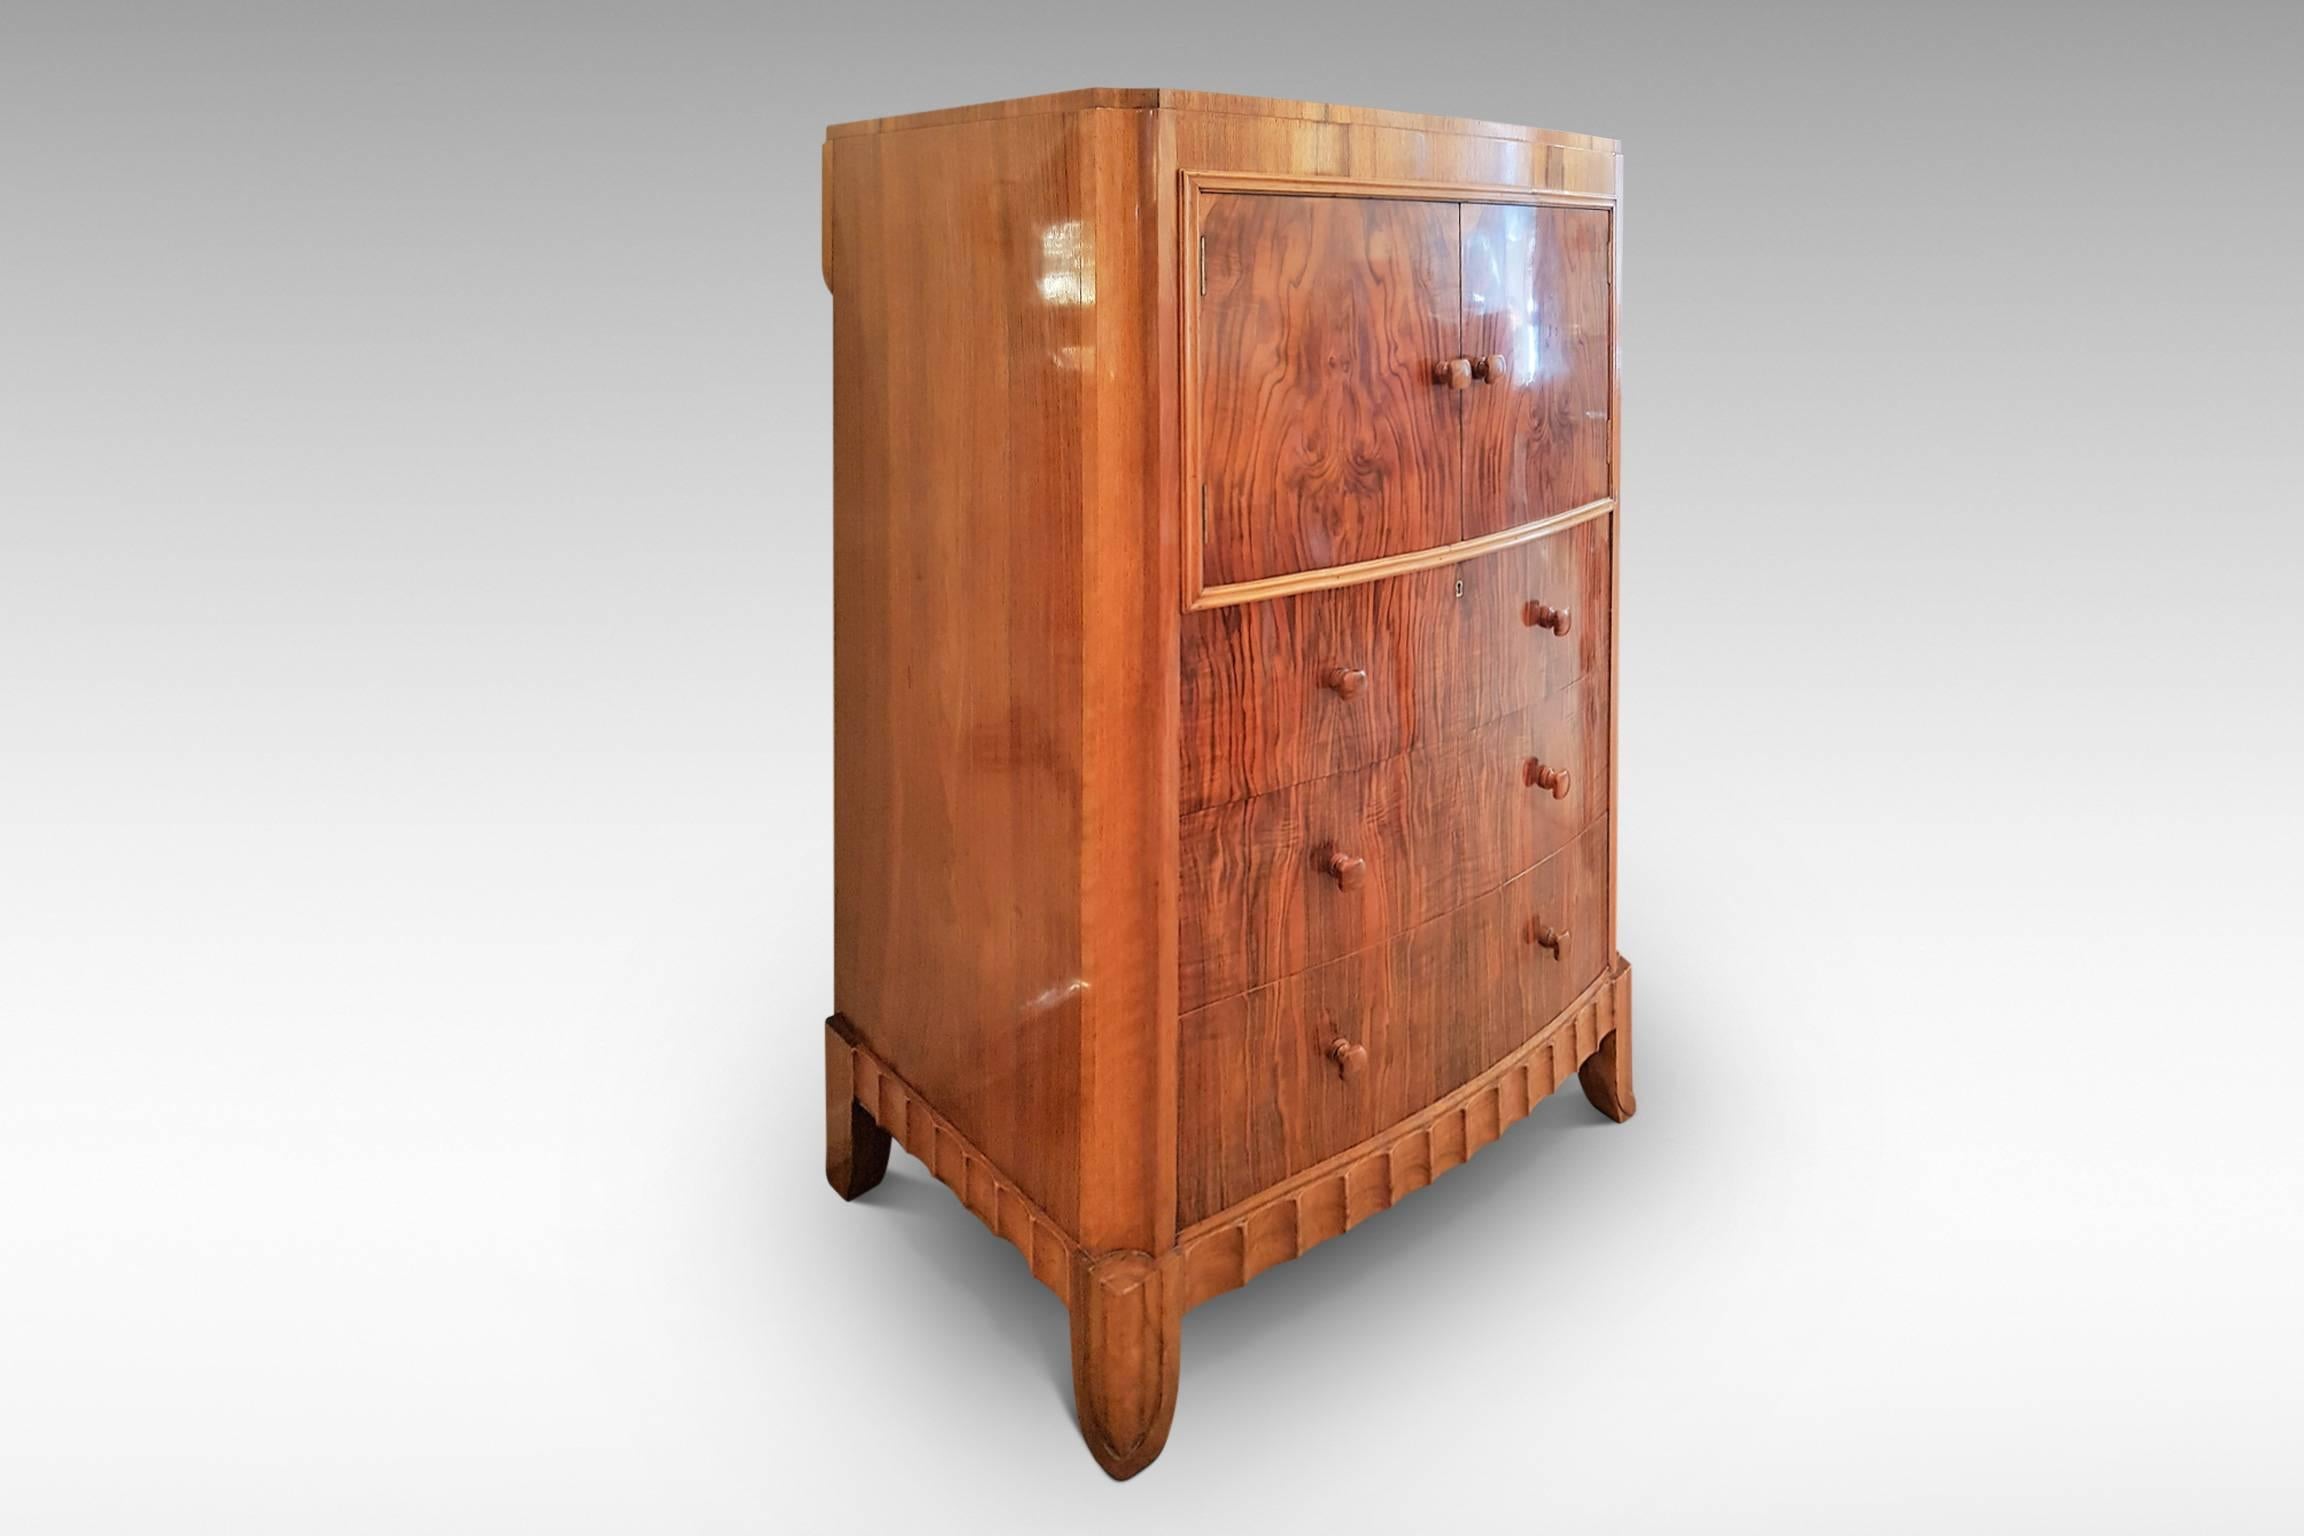 A delightful Art Deco tallboy chest with three drawers and cupboard which is attributed to Serge Chermayeff, the Artistic Director of Waring & Gillow and co-architect of the iconic modernist De La Warr Pavilion in Bexhill, England. This piece is of